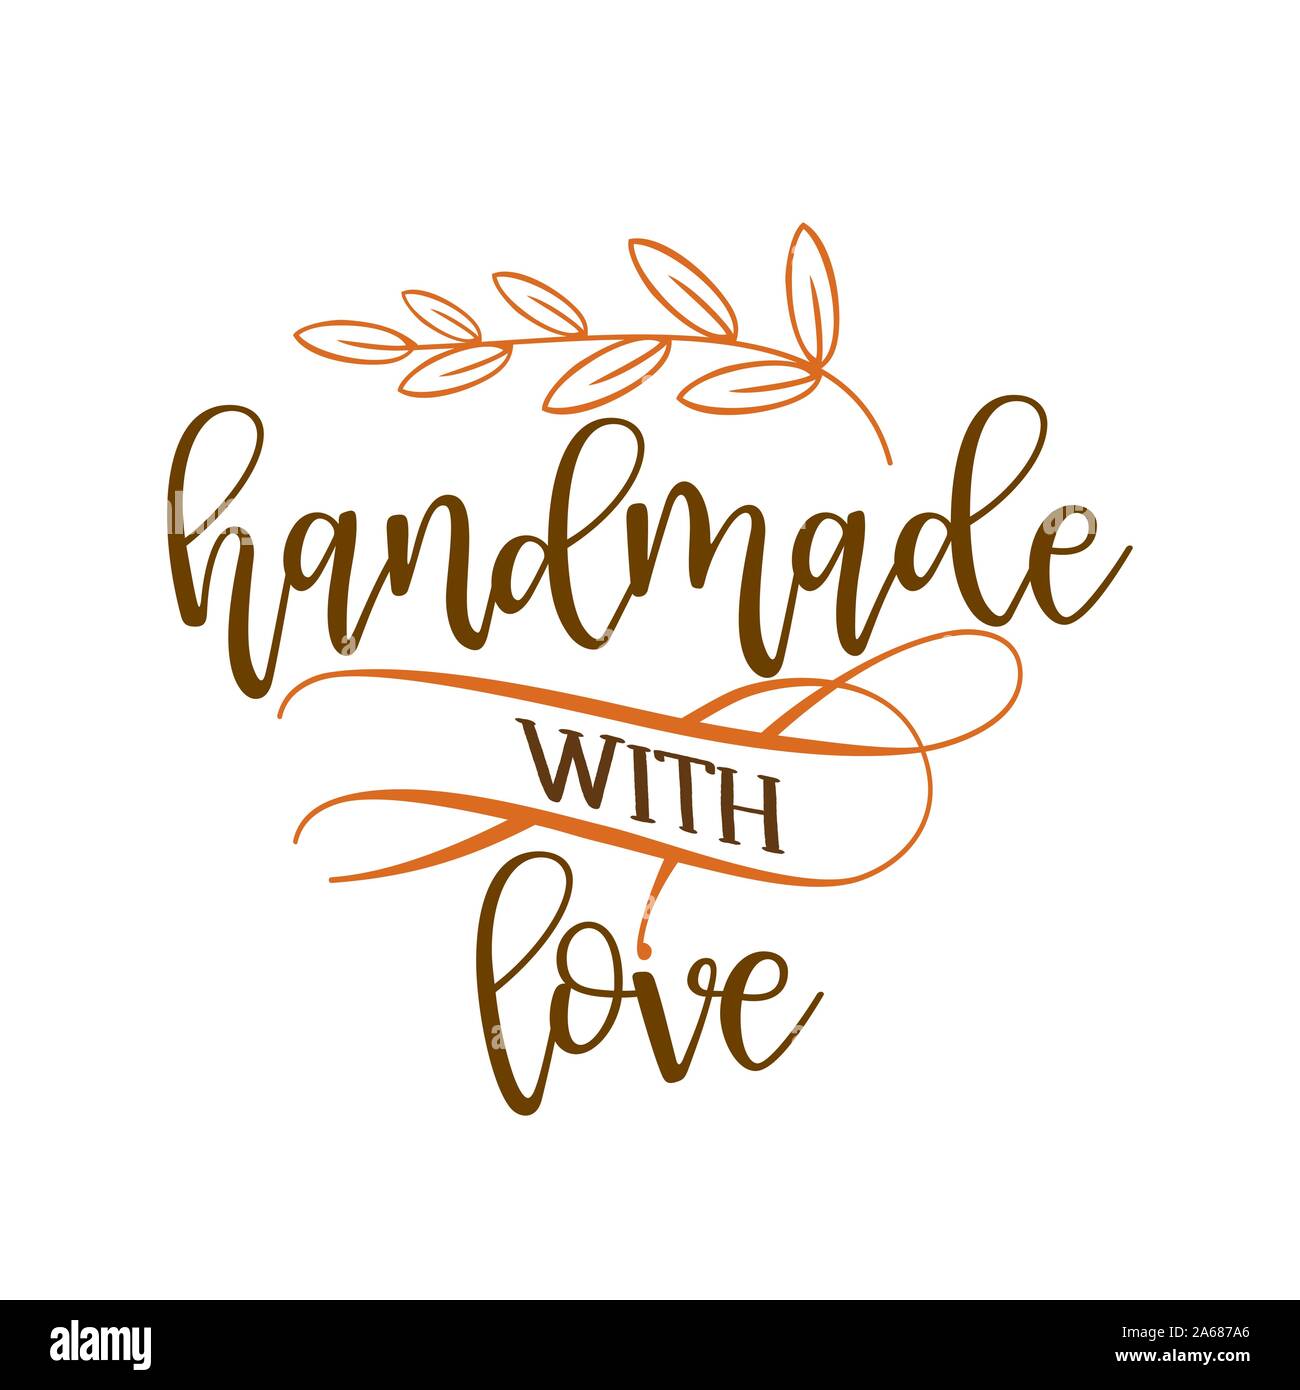 Handmade with love - stamp for homemade products and shops. Vector badge, label. Vector Illustration on a white background Stock Vector